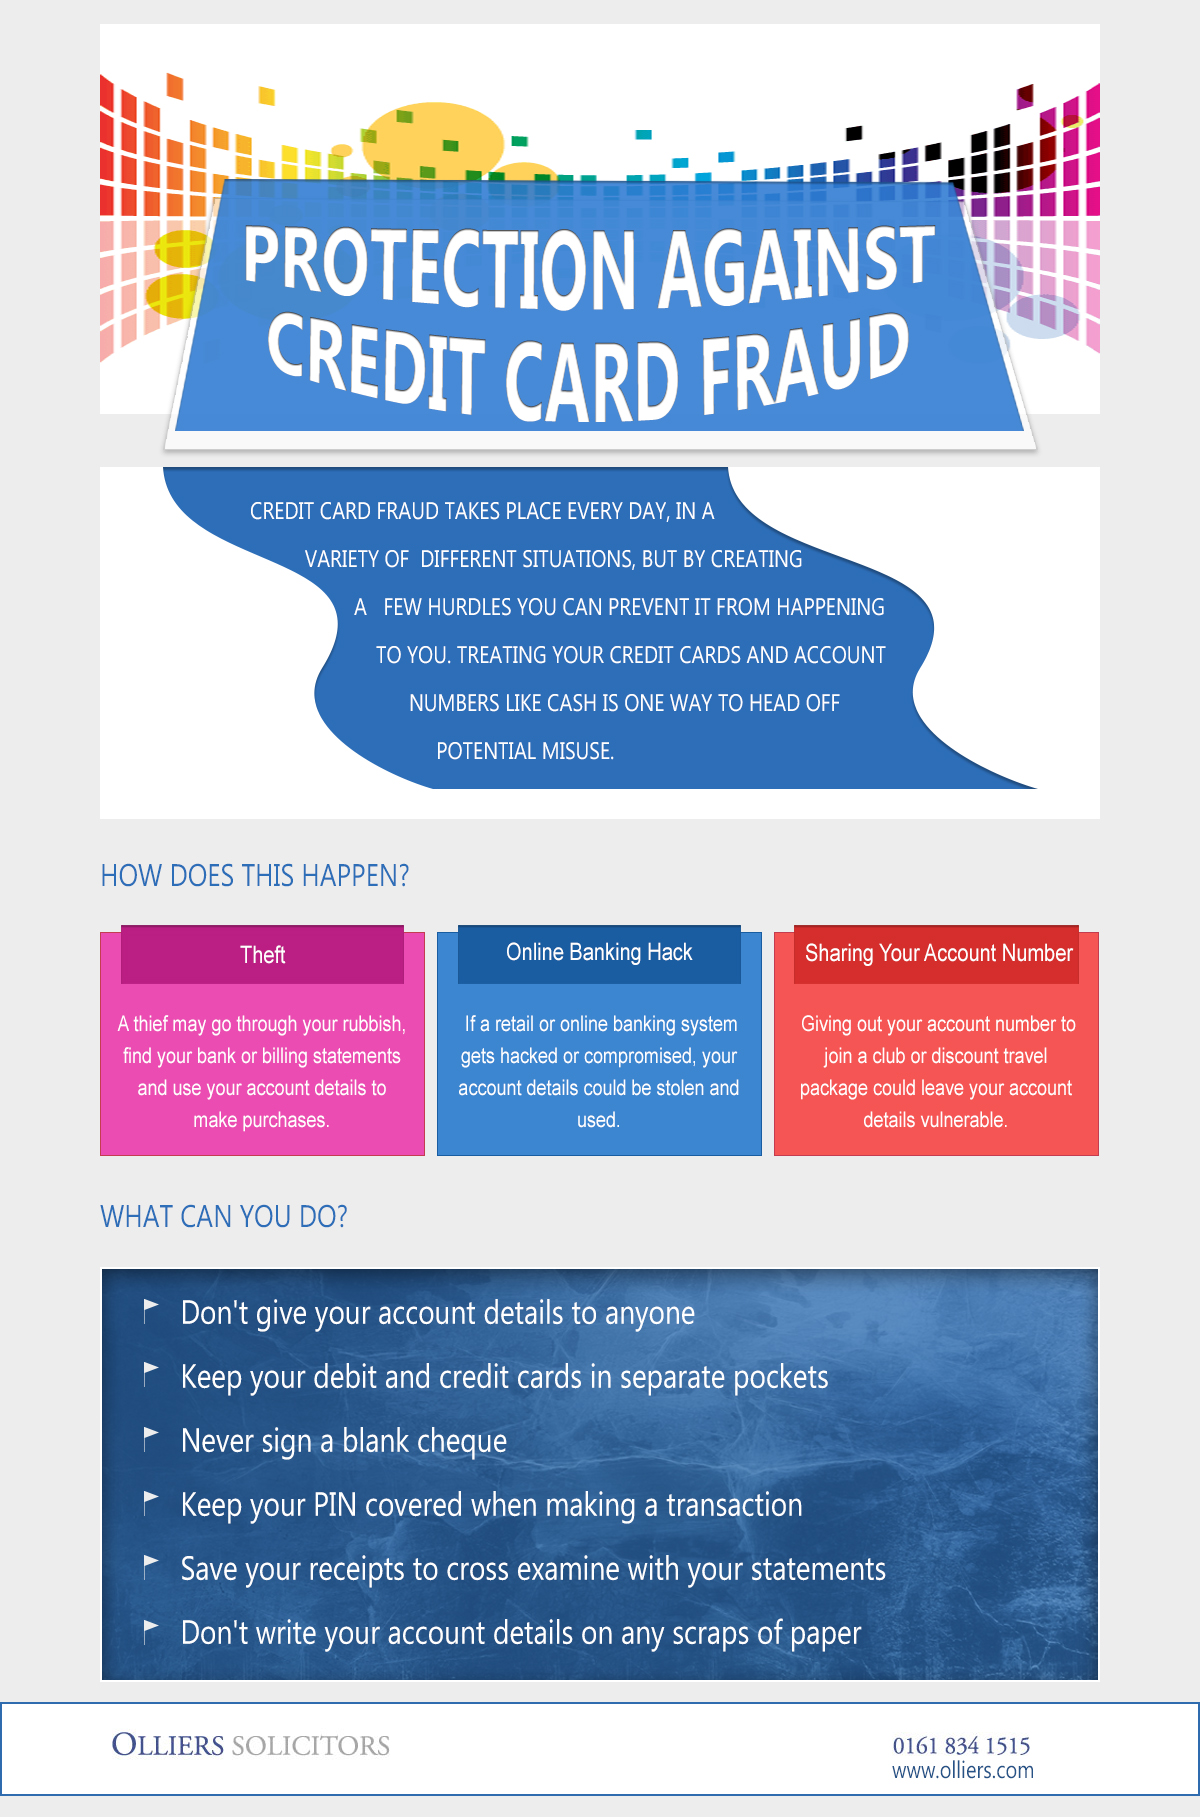 5 Crucial Steps to Unleash Your Credit Card Fraud Protection